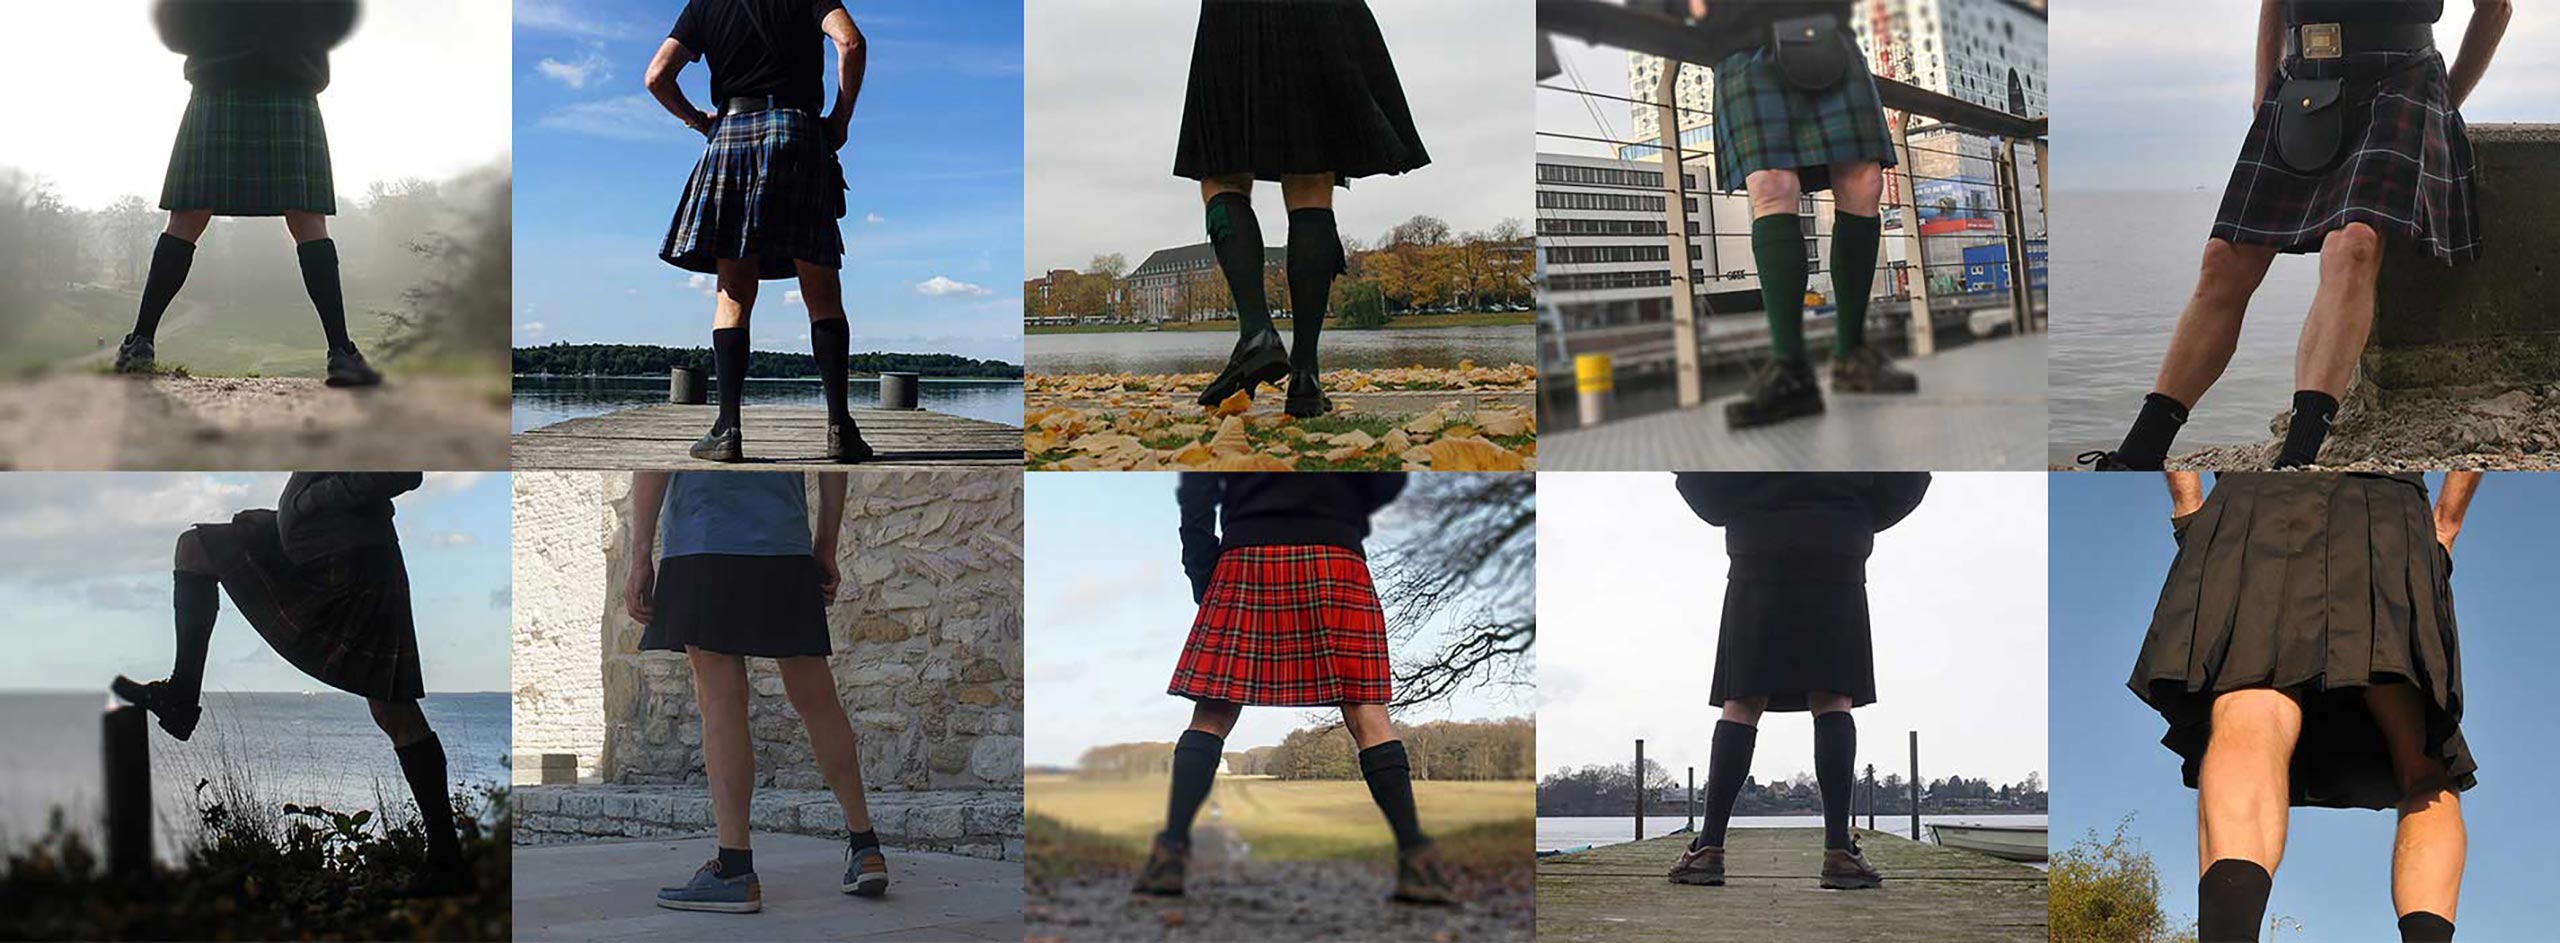 Men in kilts and skirts